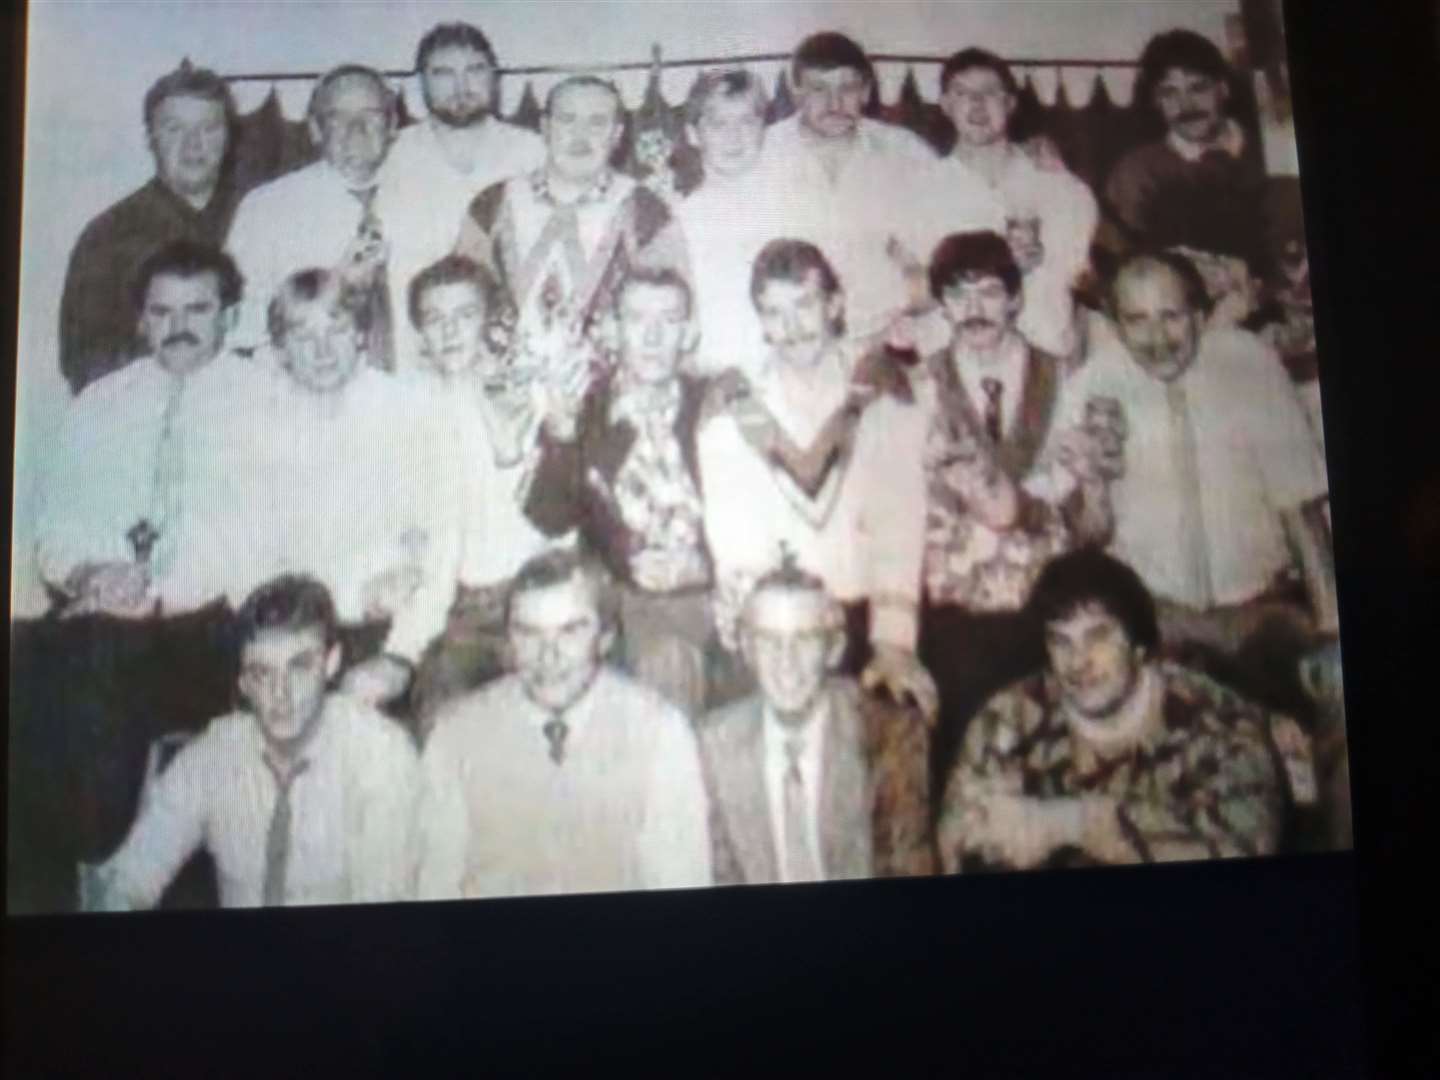 Billy Corbett, far left in the middle row, during an Inverness District Council Works’ staff night out in the 1980s.